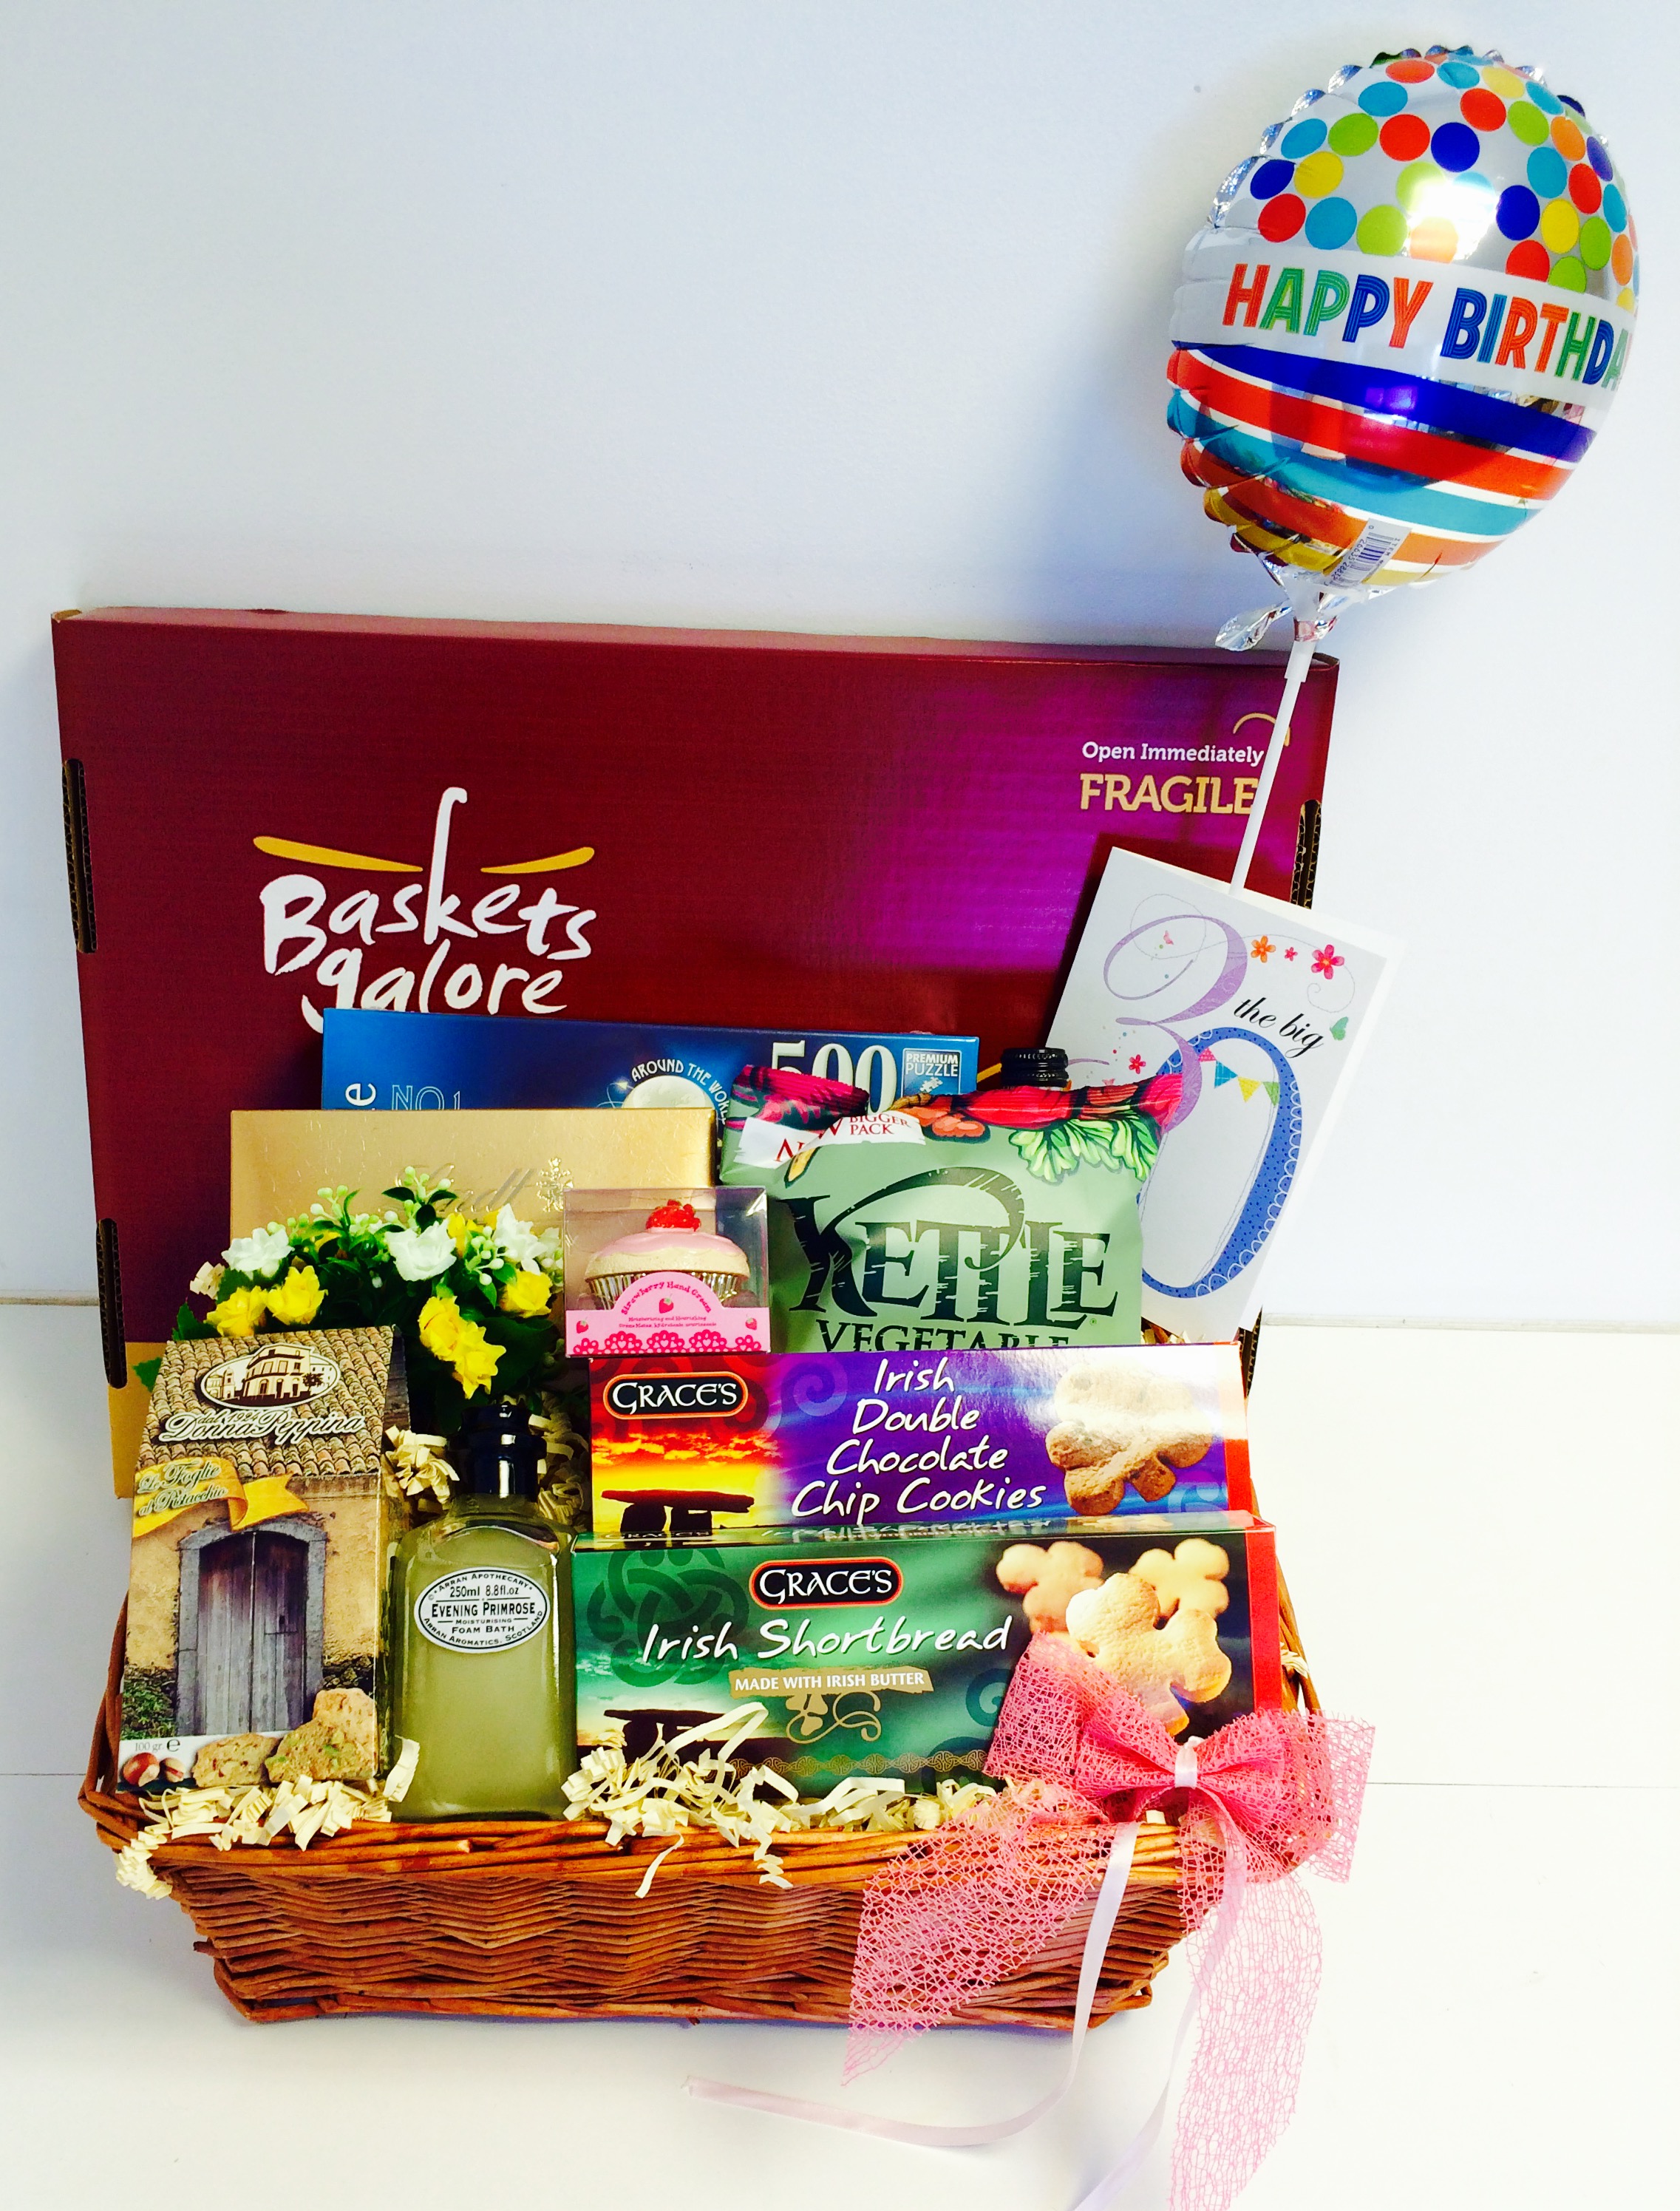 Be Inspired - Create Your Own Birthday Basket